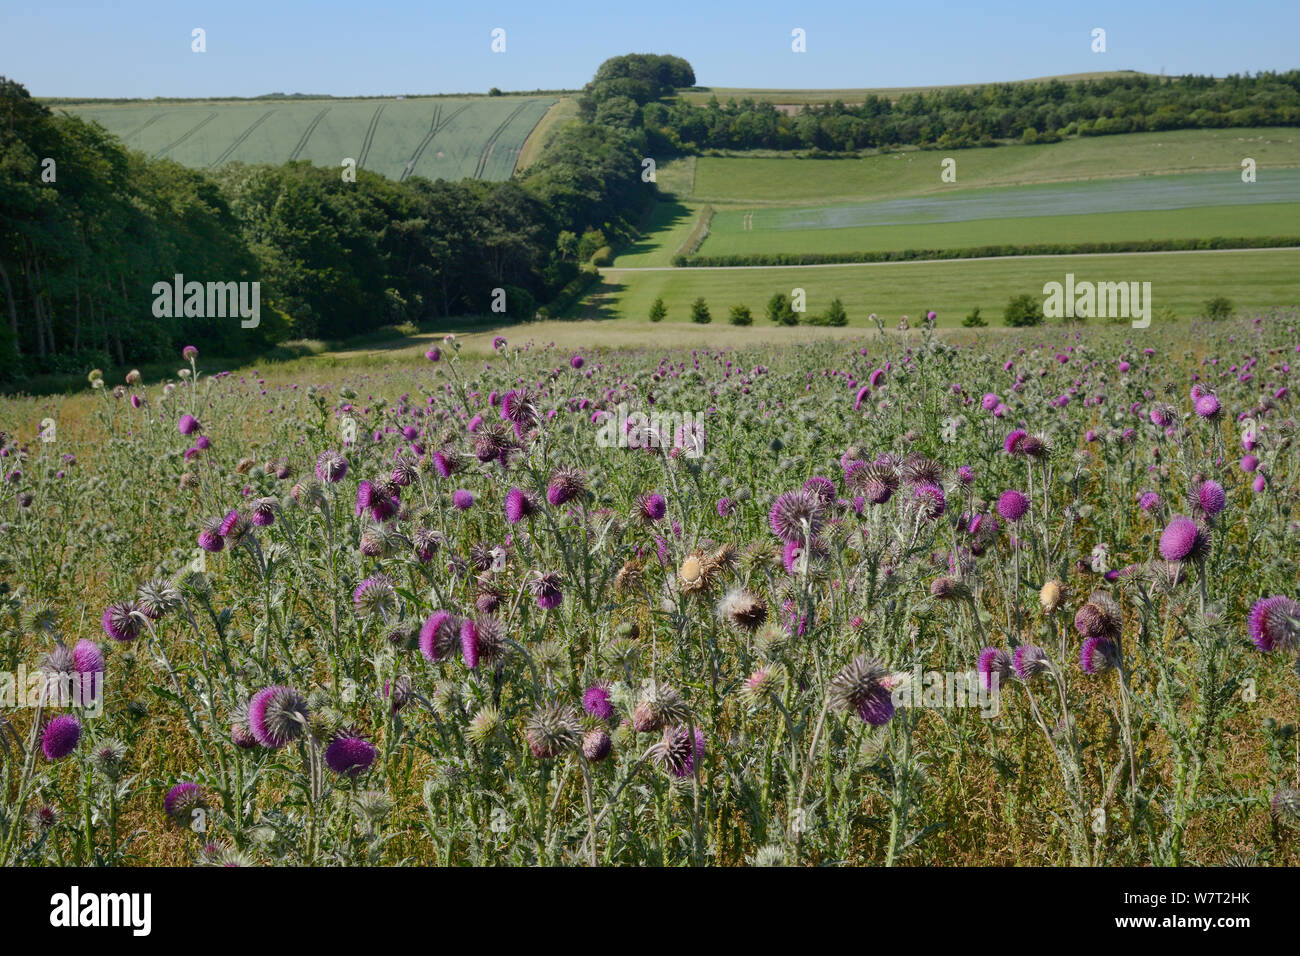 Nodding / Musk thistles (Carduus nutans) flowering in a fallow field with a tree belt and a flowering Linseed crop (Linum usitatissimum) in the background, Marlborough Downs farmland, Wiltshire, UK, July. Stock Photo